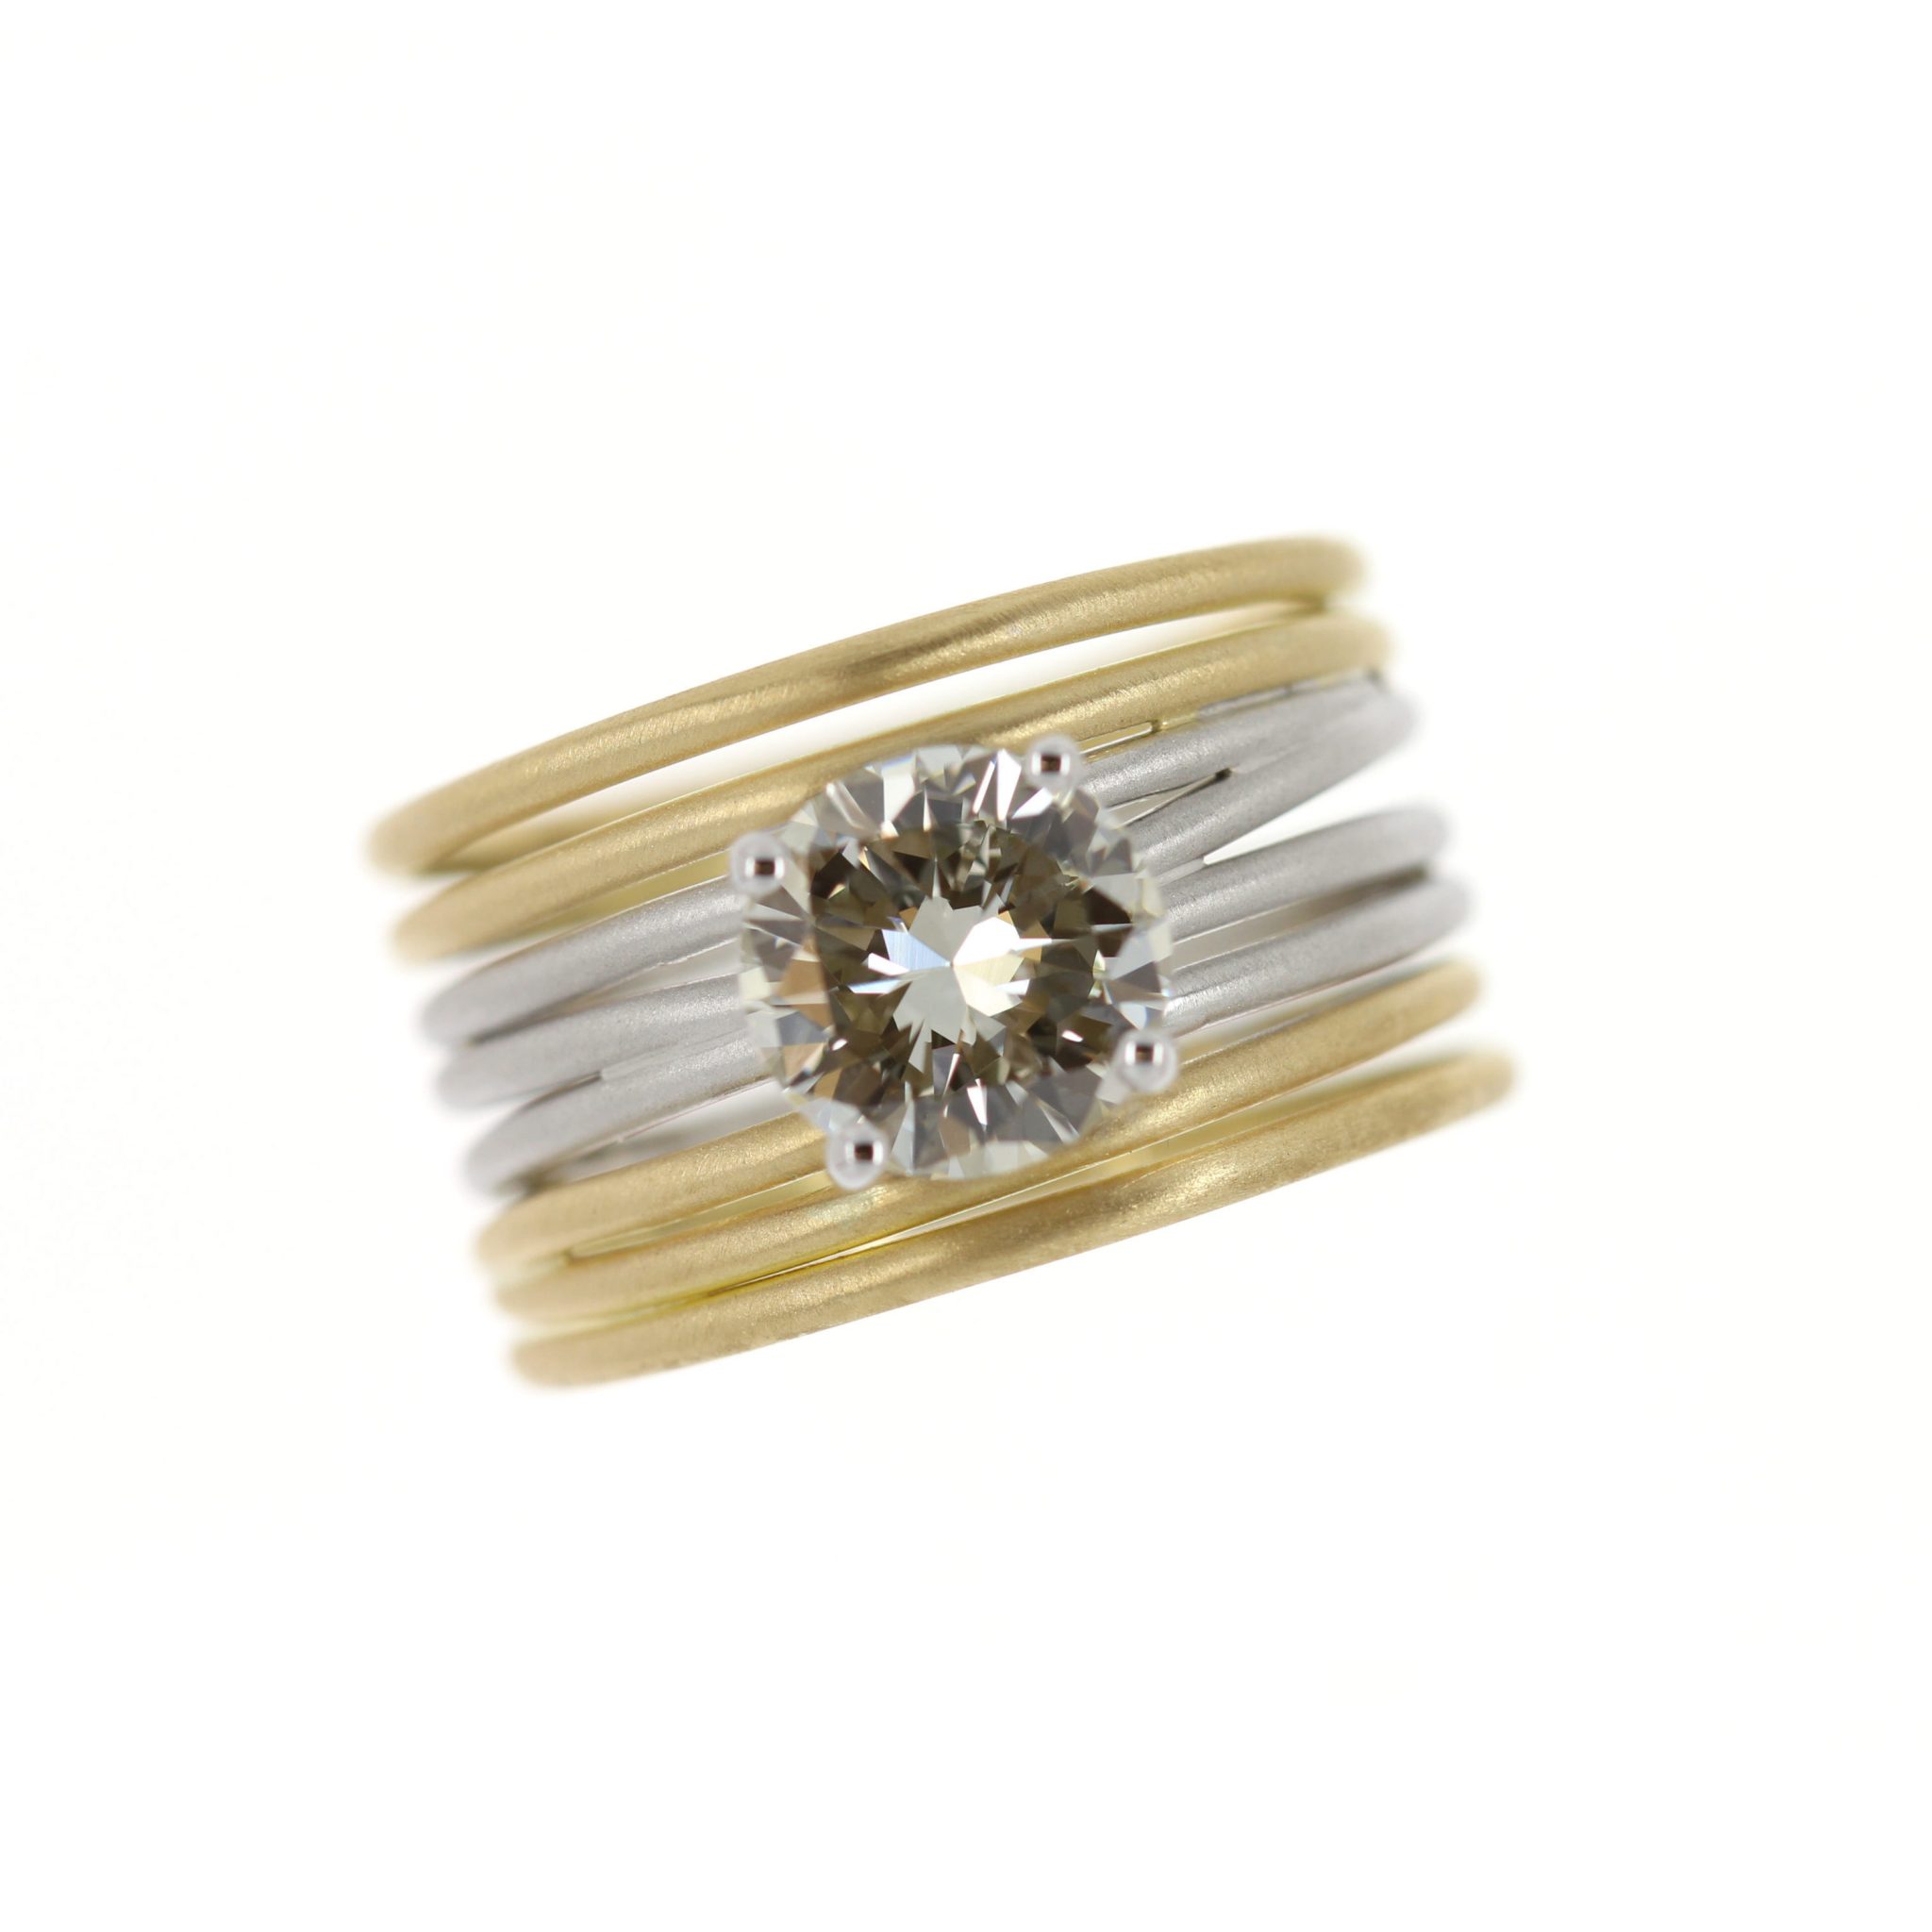 ‘Whipped’ band ring in yellow and white gold